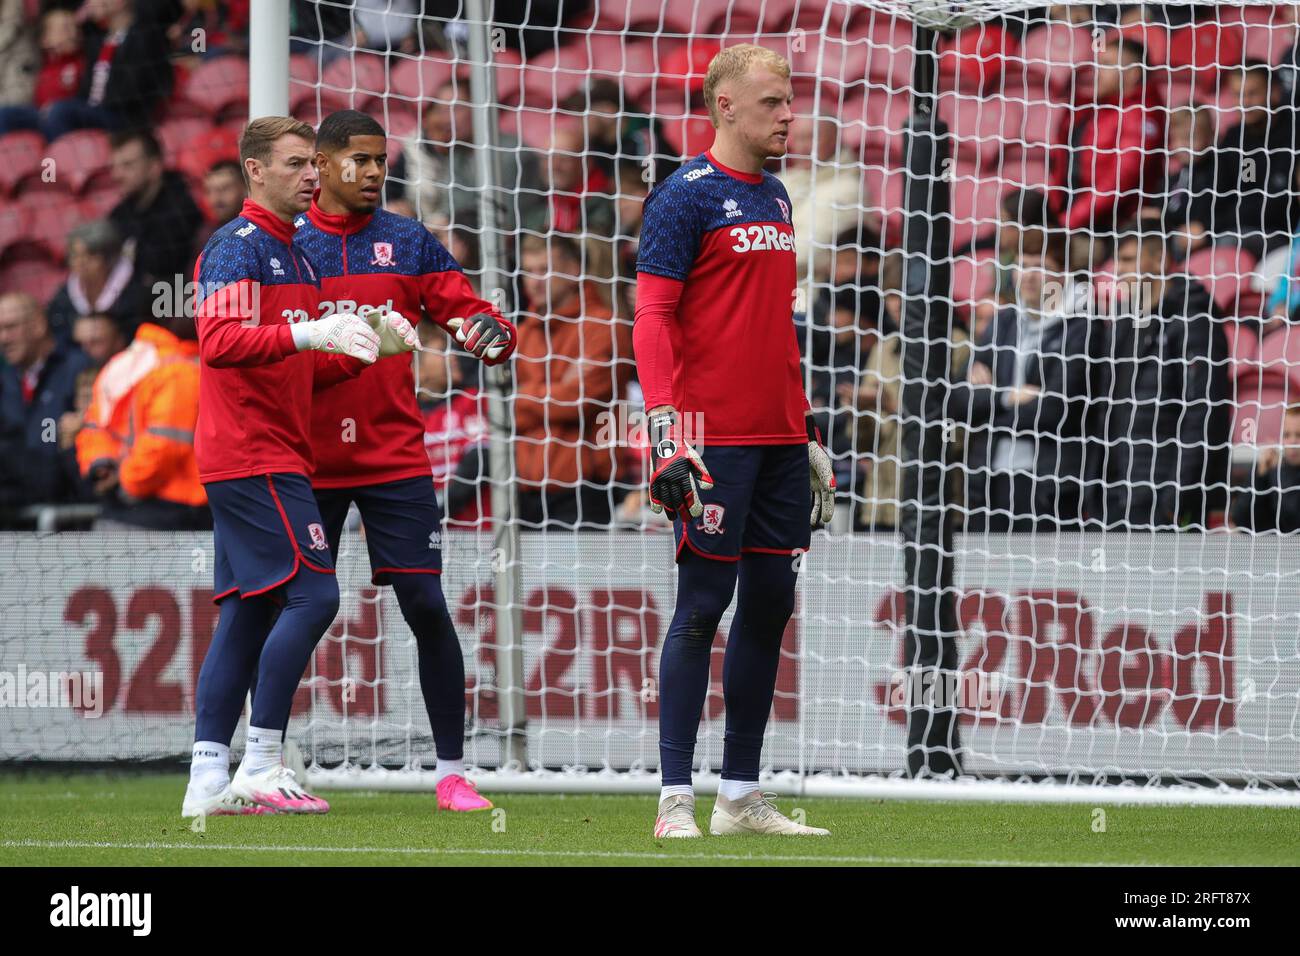 Jamie Jones #32 of Middlesbrough, Seny Dieng #1 of Middlesbrough and Tom Glover #23 of Middlesbrough during the pre match warm up ahead of the Sky Bet Championship match Middlesbrough vs Millwall at Riverside Stadium, Middlesbrough, United Kingdom, 5th August 2023  (Photo by James Heaton/News Images) Stock Photo